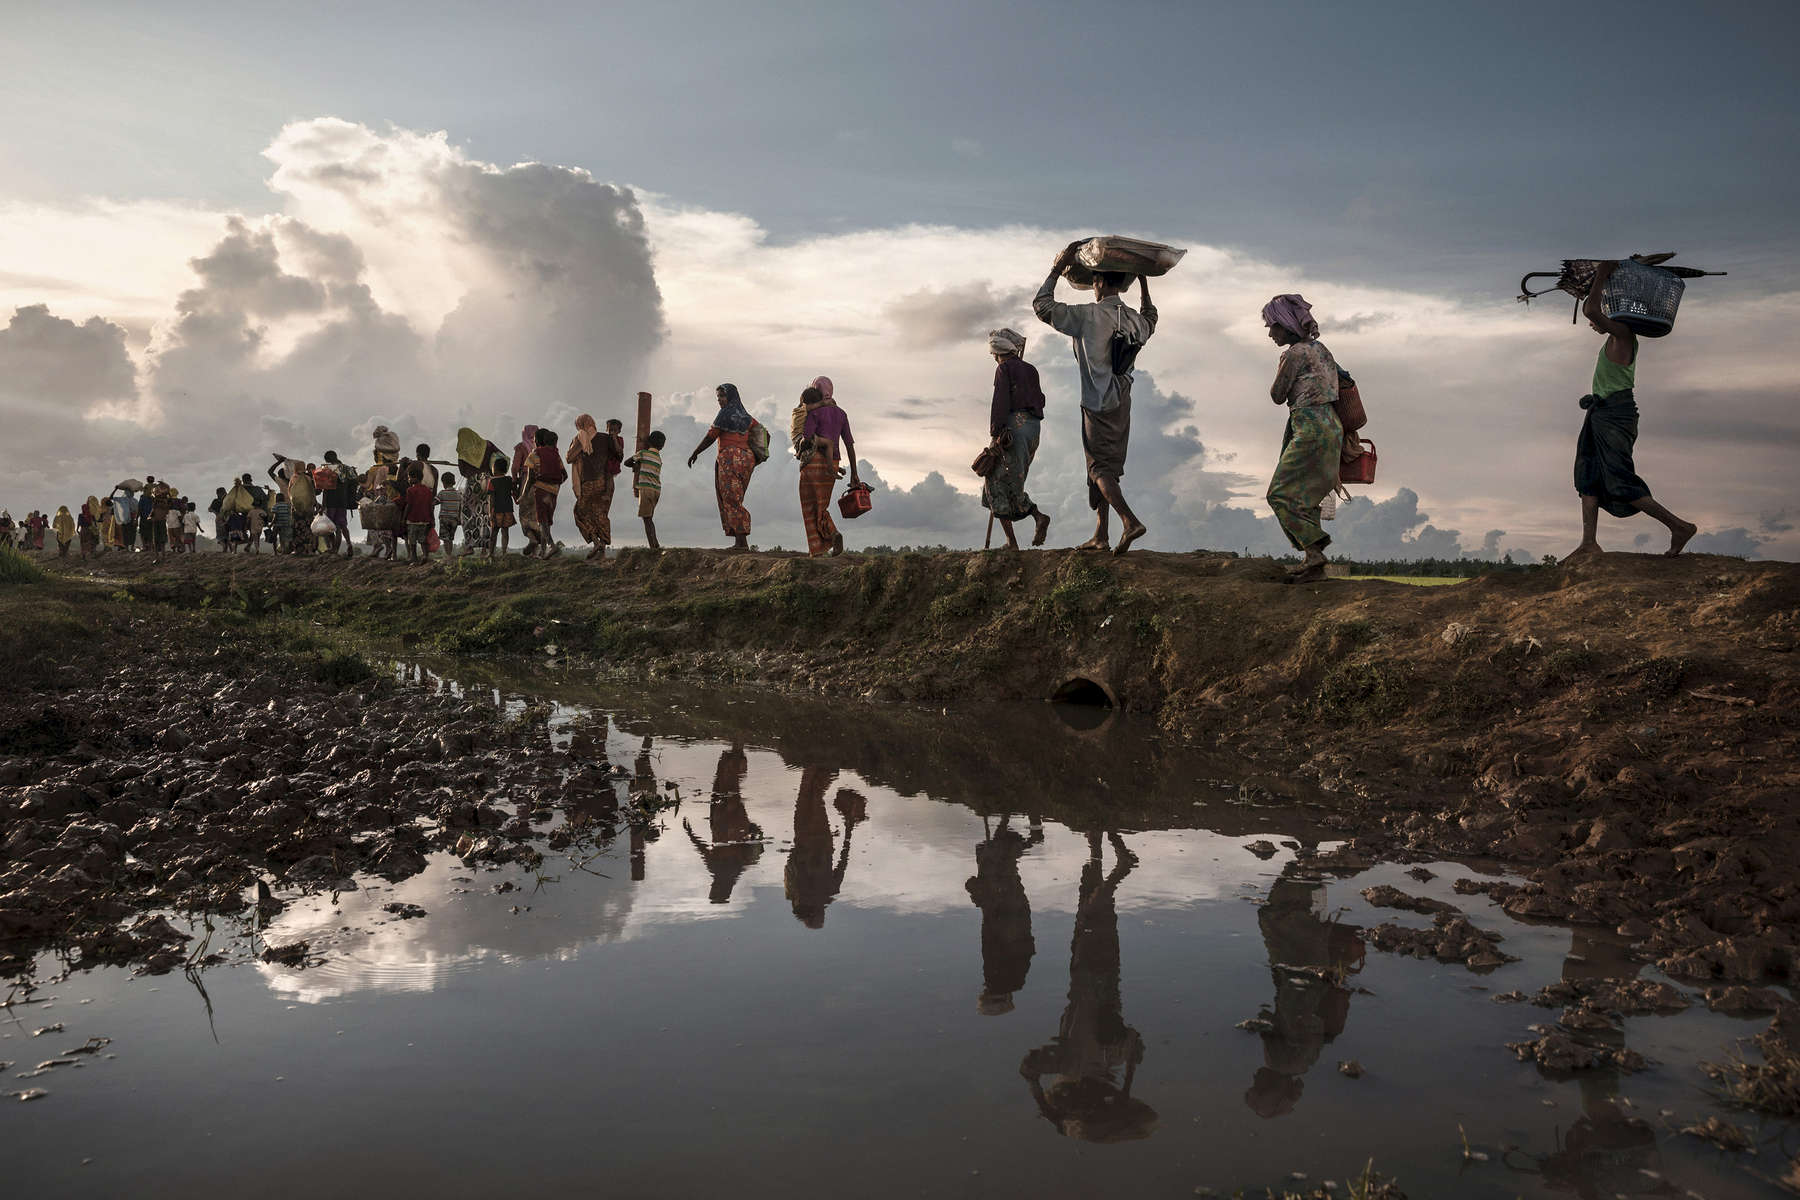 PALONG KHALI, BANGLADESH - OCTOBER 9: Thousands of Rohingya refugees fleeing from Myanmar walk along a muddy rice field after crossing the border in Palong Khali, Cox's Bazar, Bangladesh. The refugee emergency unfolded in late August after an attack on state security forces by Rohingya insurgents, triggering a brutal military crackdown that has forced more than half of the country’s 1.1 million population fleeing to neighboring Bangladesh creating the fastest cross-border exodus ever witnessed with over 655,000 new arrivals. Thousands of children who are travellling alone are at serious risk of trafficking and exploitation. Many traumatized refugees arrived telling stories of horror alleging rape, killings and the burning of hundreds of villages, which have been well documented by the media, along with the U.N and various human rights groups. 